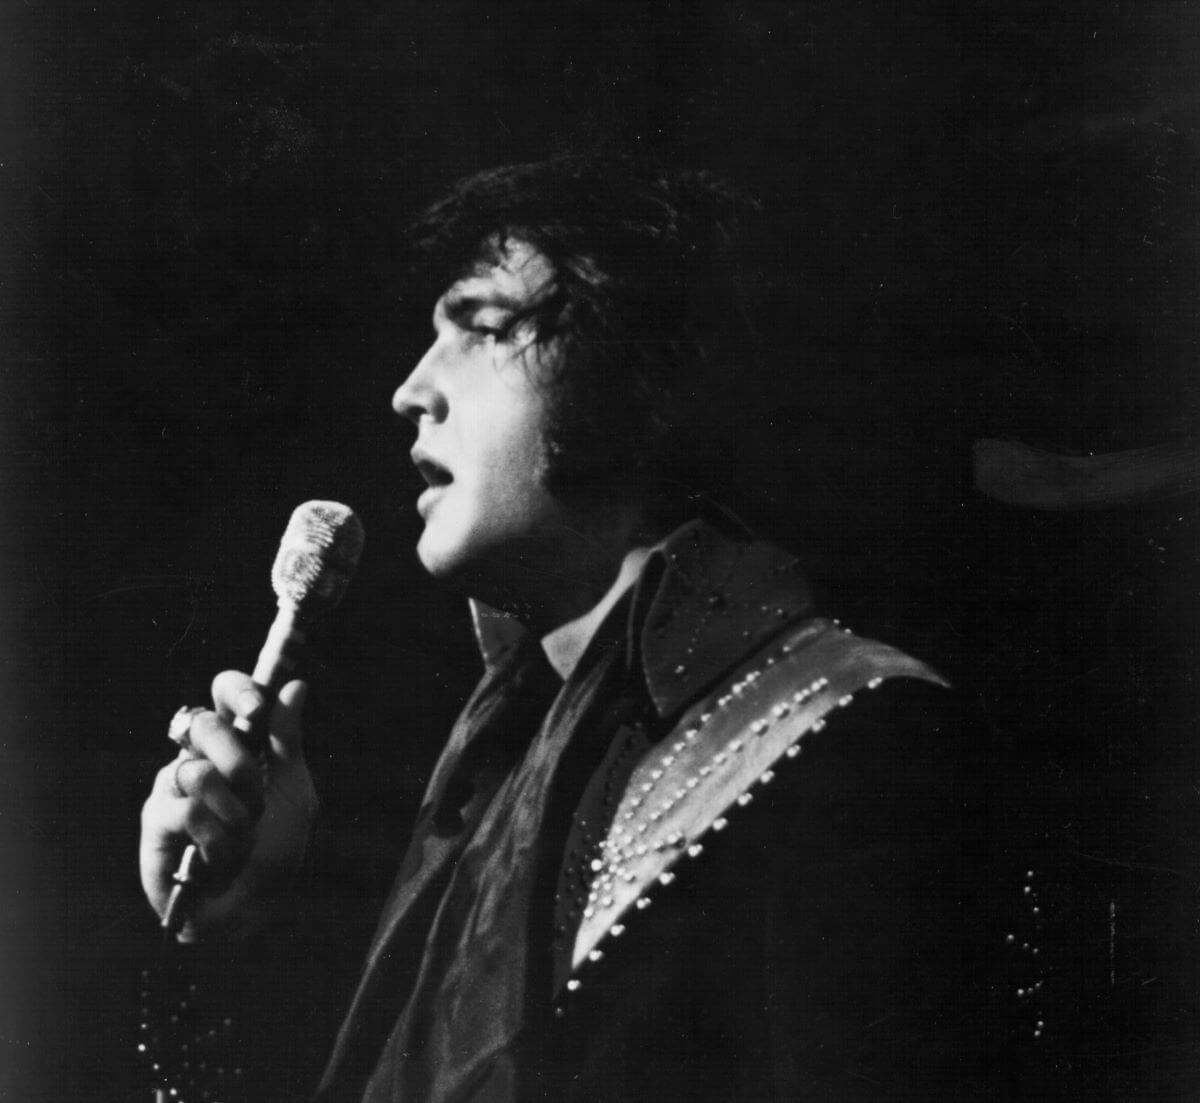 A black and white picture of Elvis Presley singing into a microphone while in side profile.